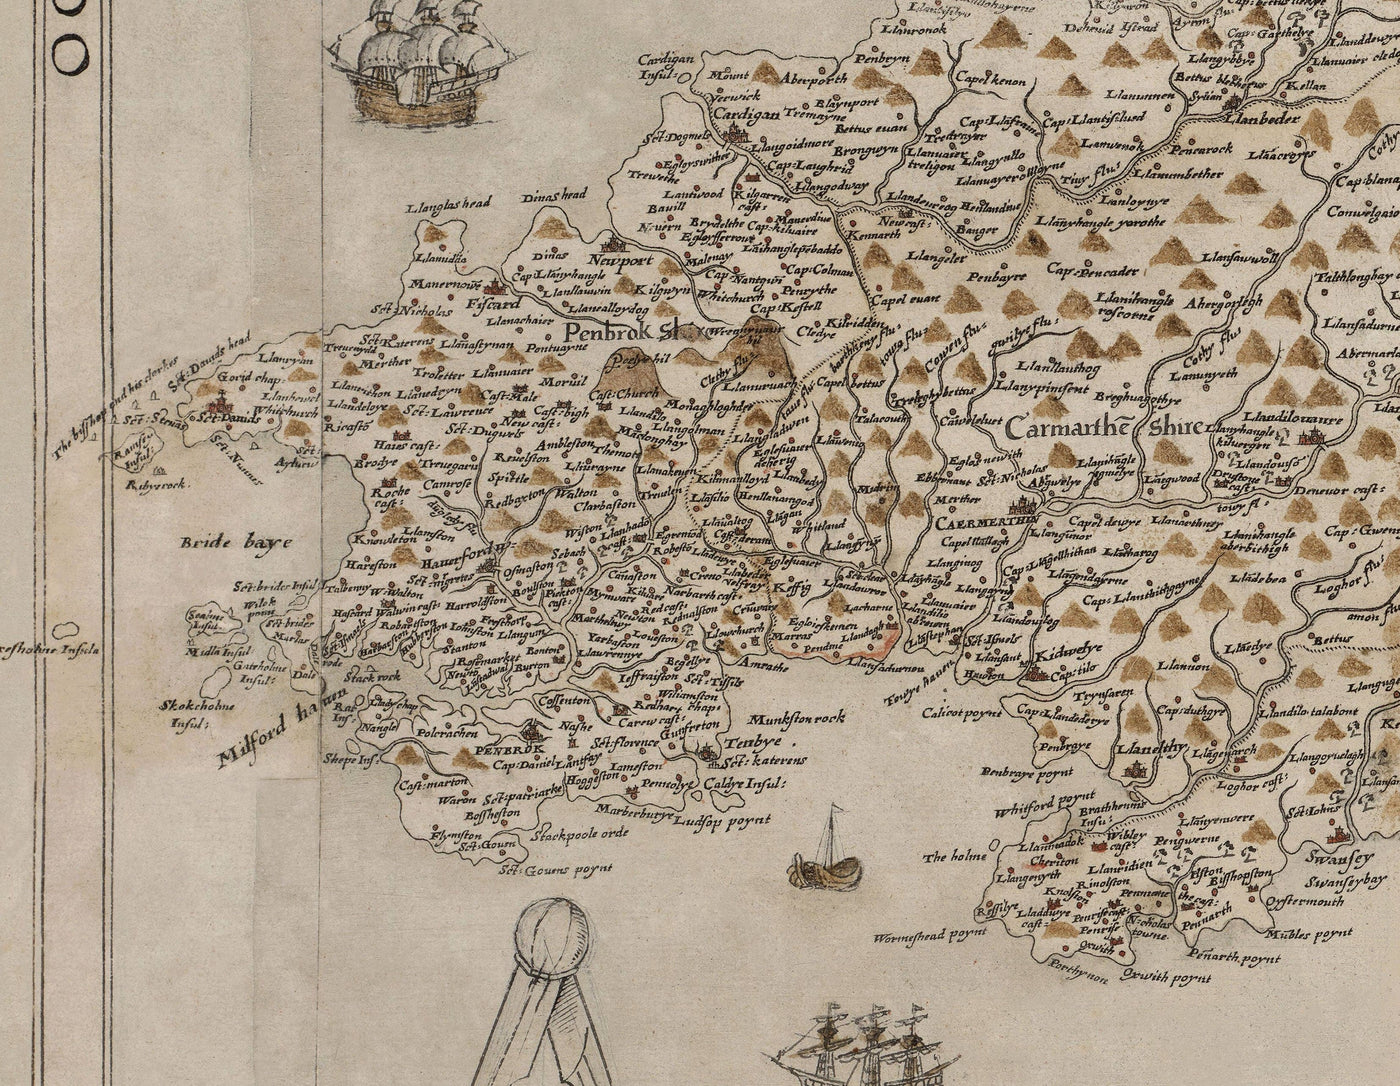 Old Map of Wales, Cymru by Christopher Saxton in 1580 - First Accurate Map of Wales